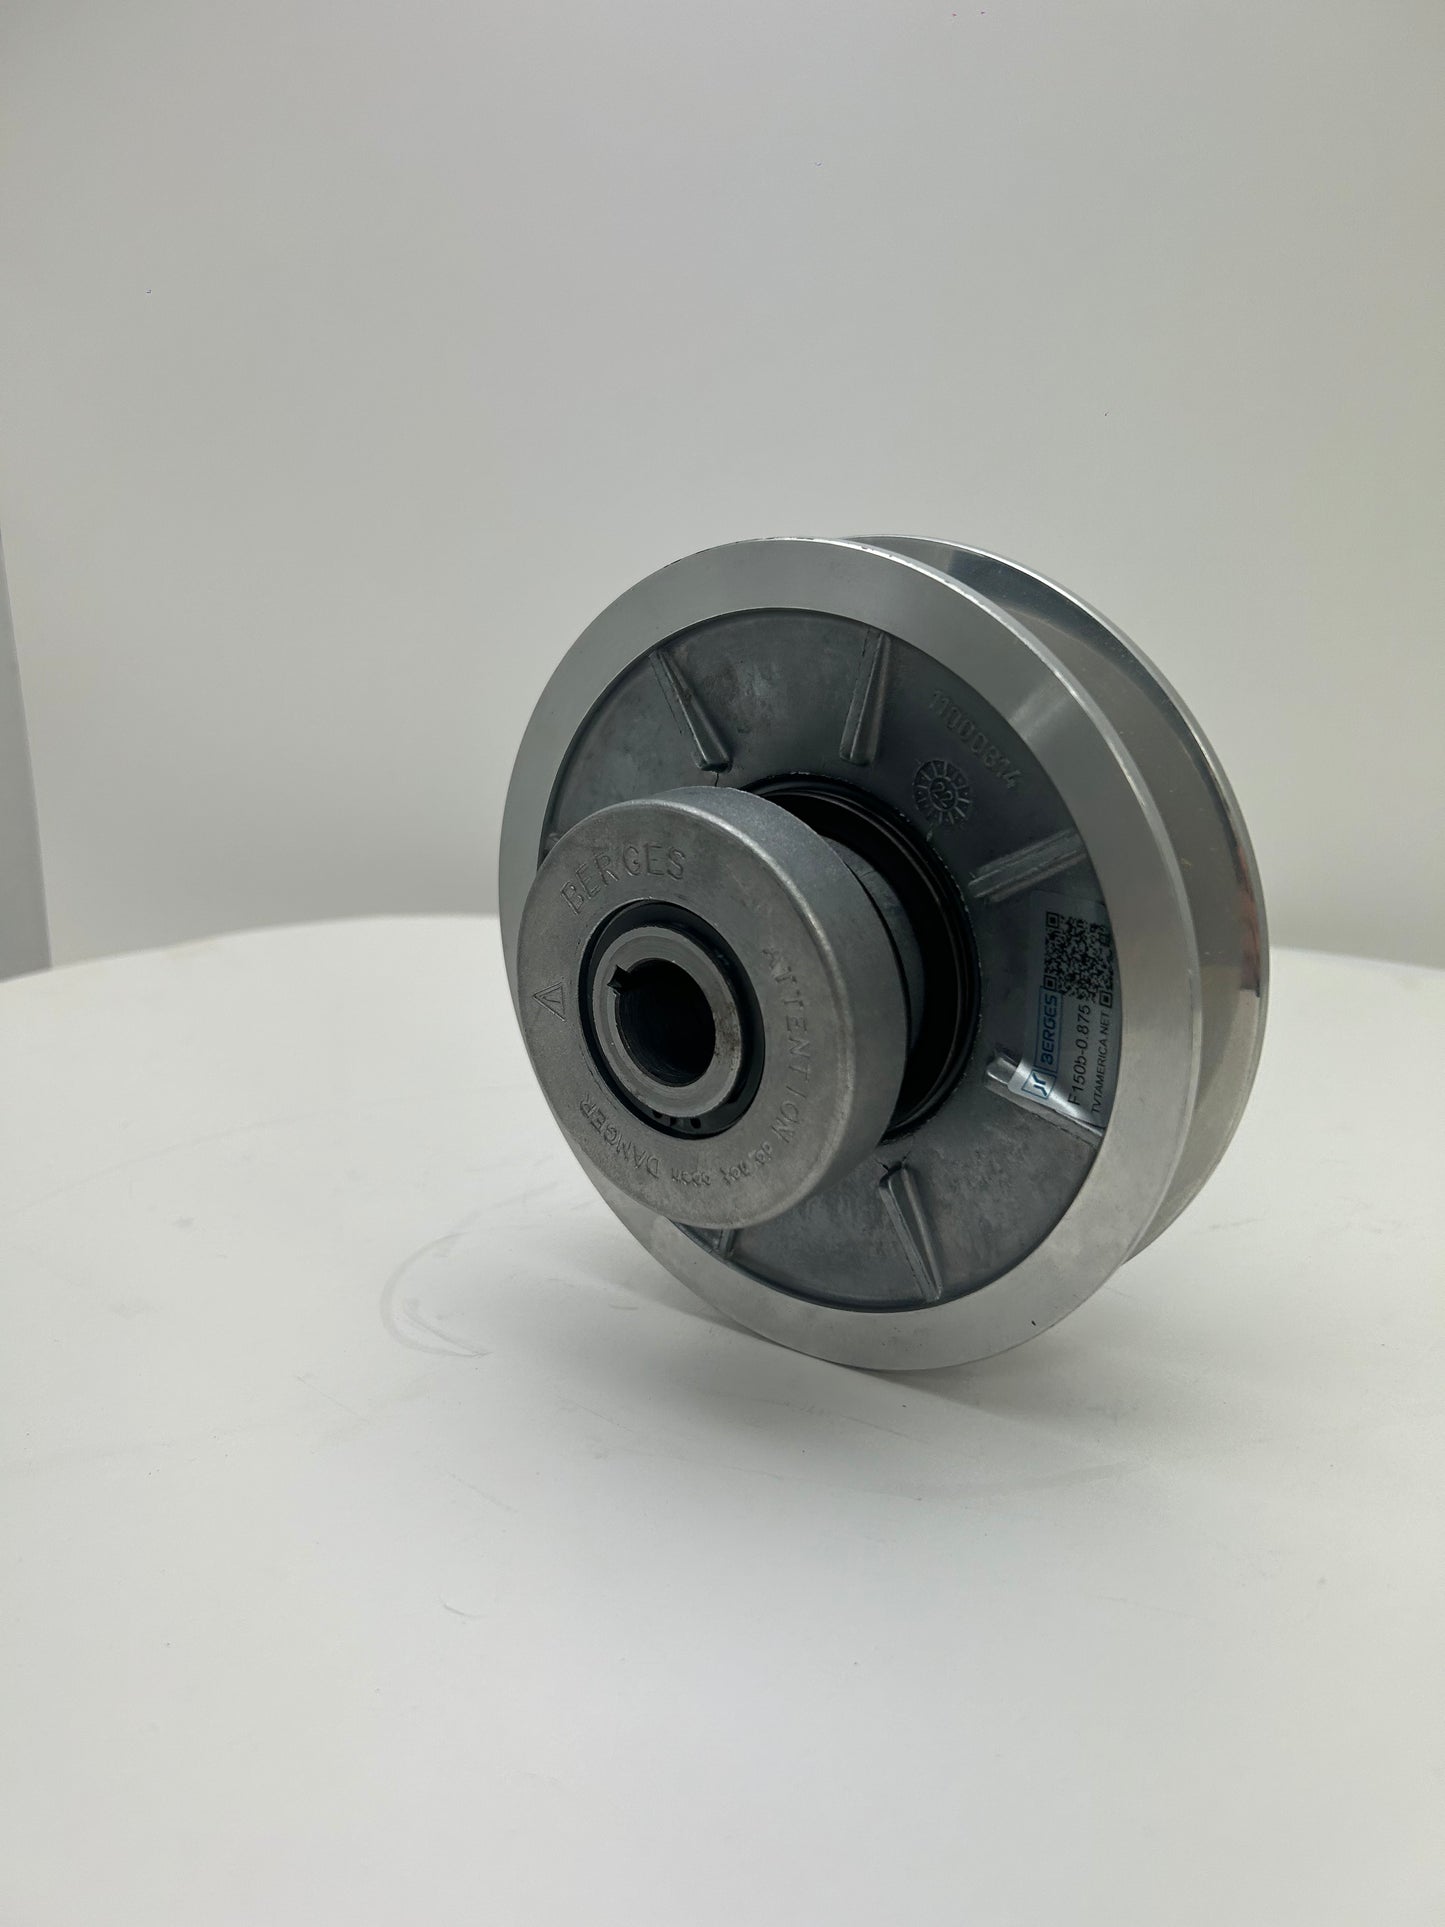 Berges® F150b Tension Pulley